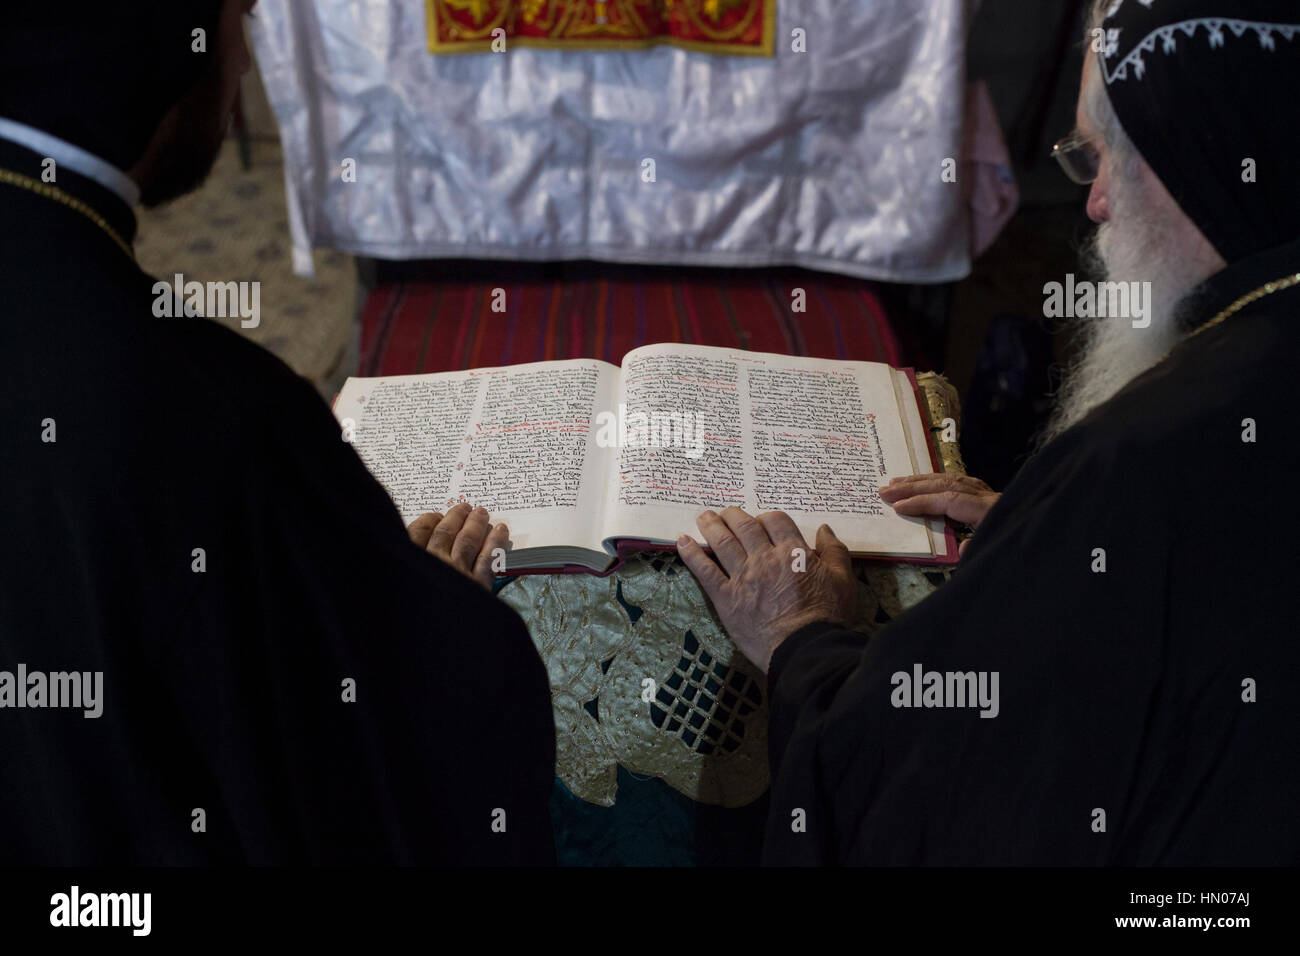 Jerusalem, Israel - November 17, 2013: Syrian Orthodox priests hold Sunday mass in the Syrian Chapel next to Saint Joseph of Eritrea tomb in the Churc Stock Photo